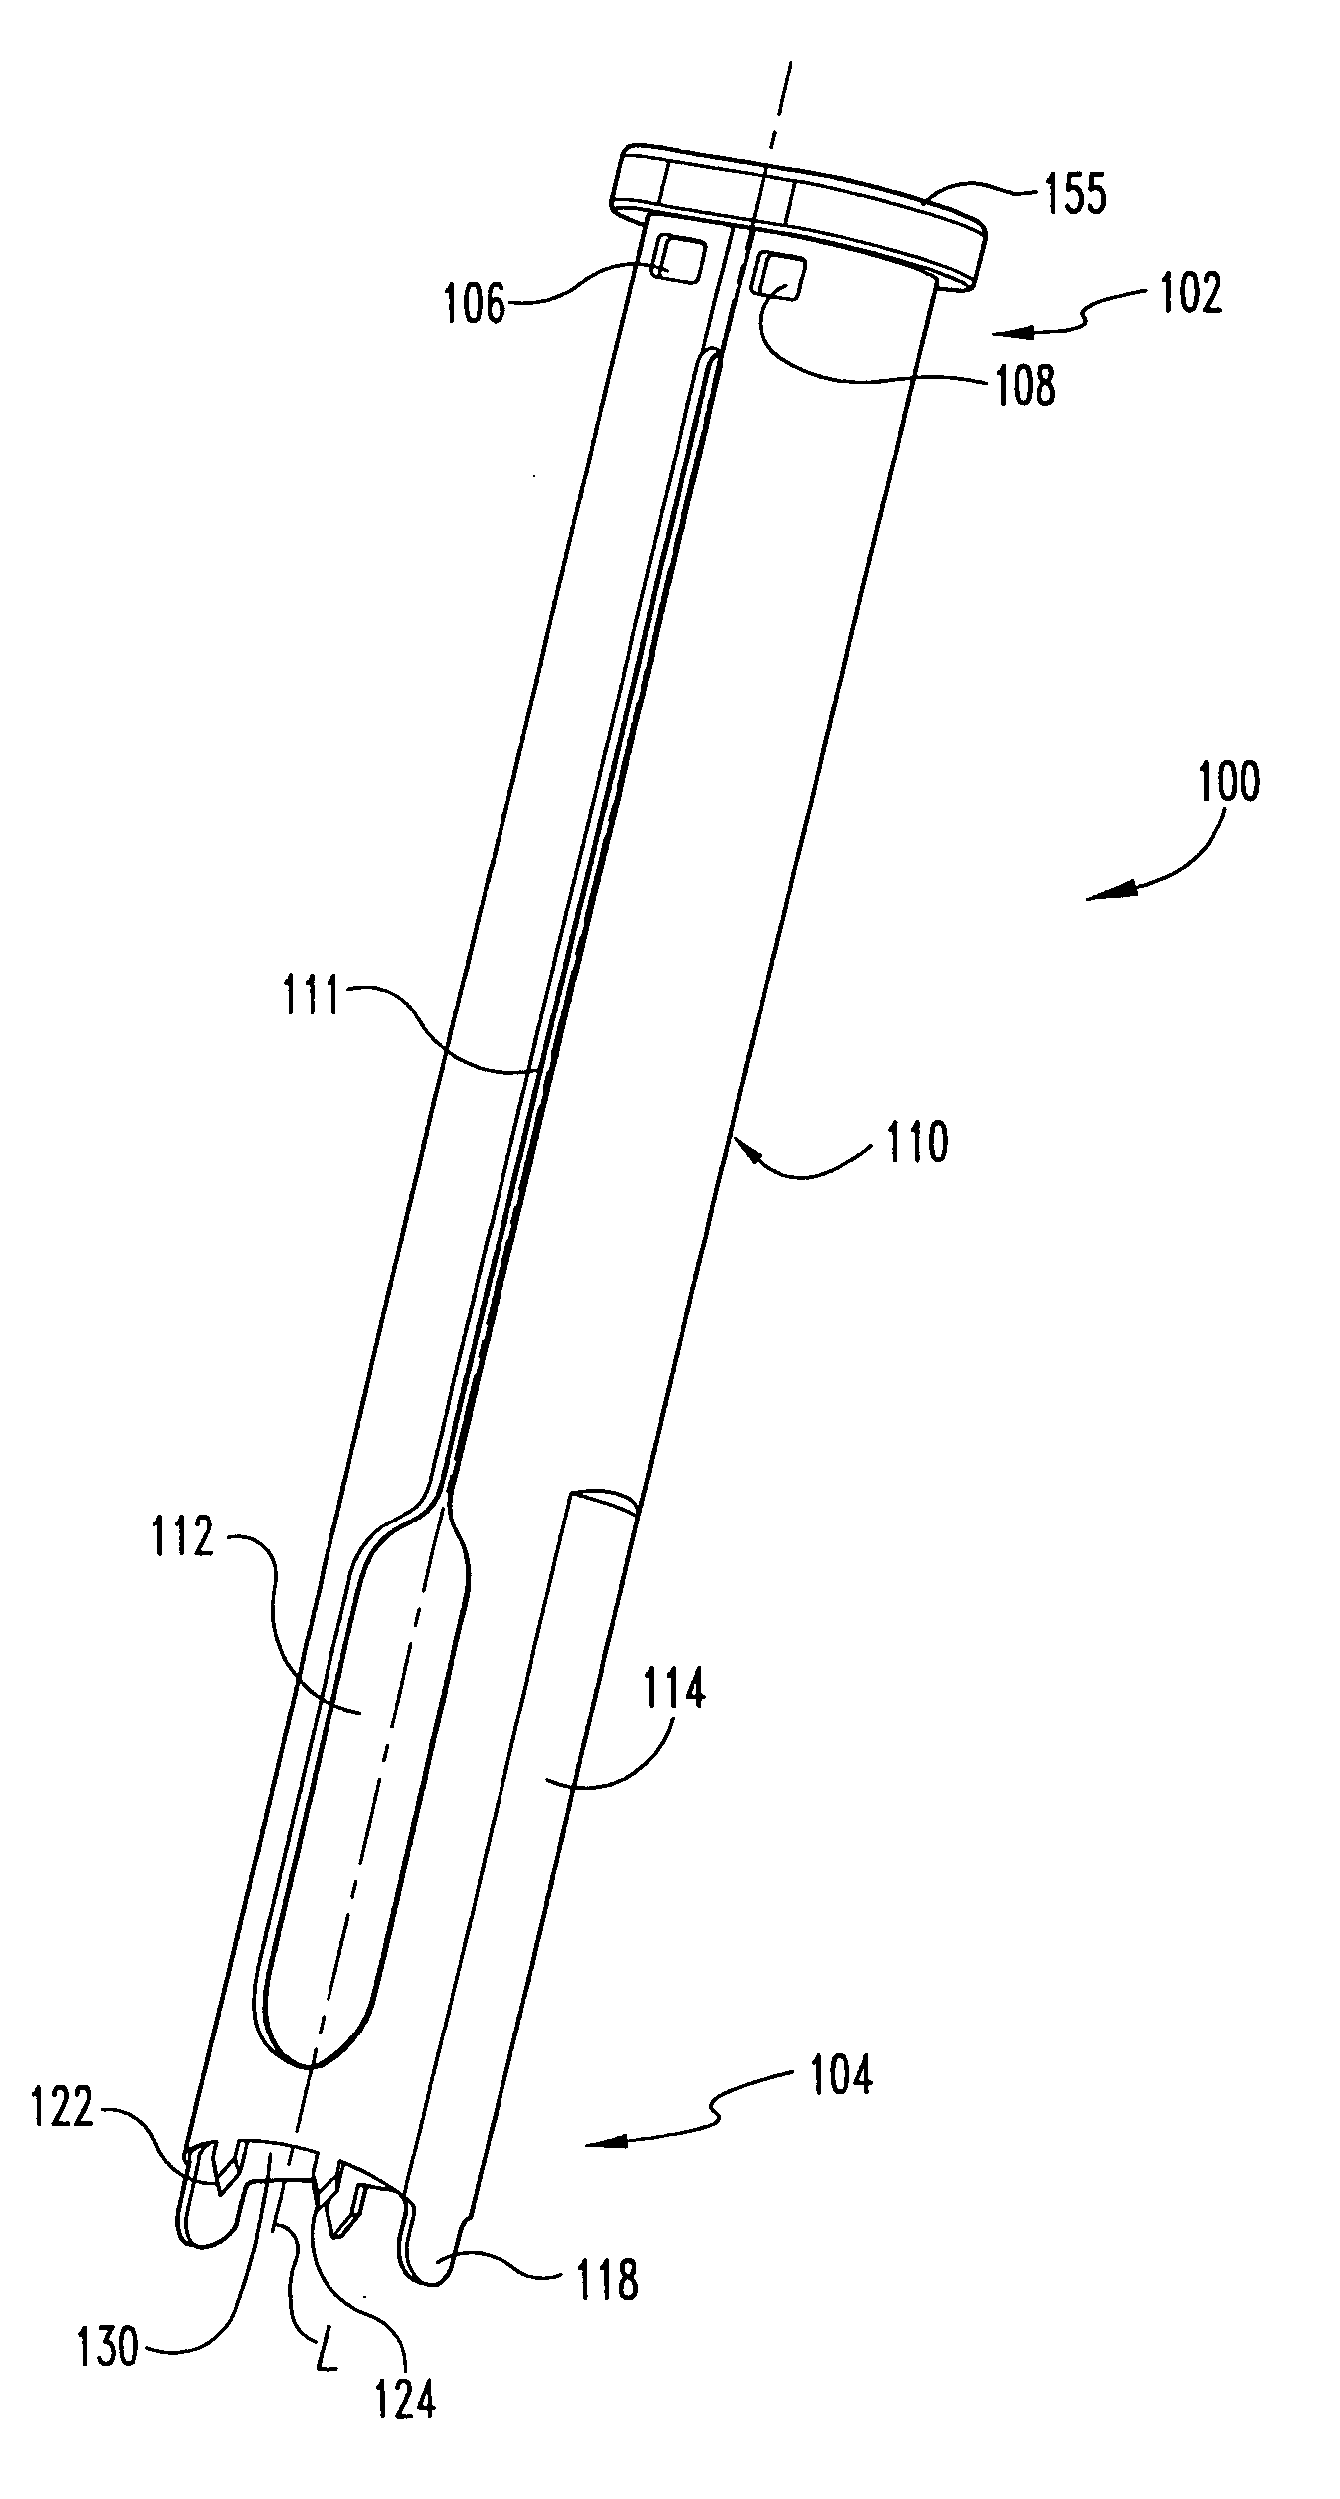 Methods and instrument for vertebral interbody fusion